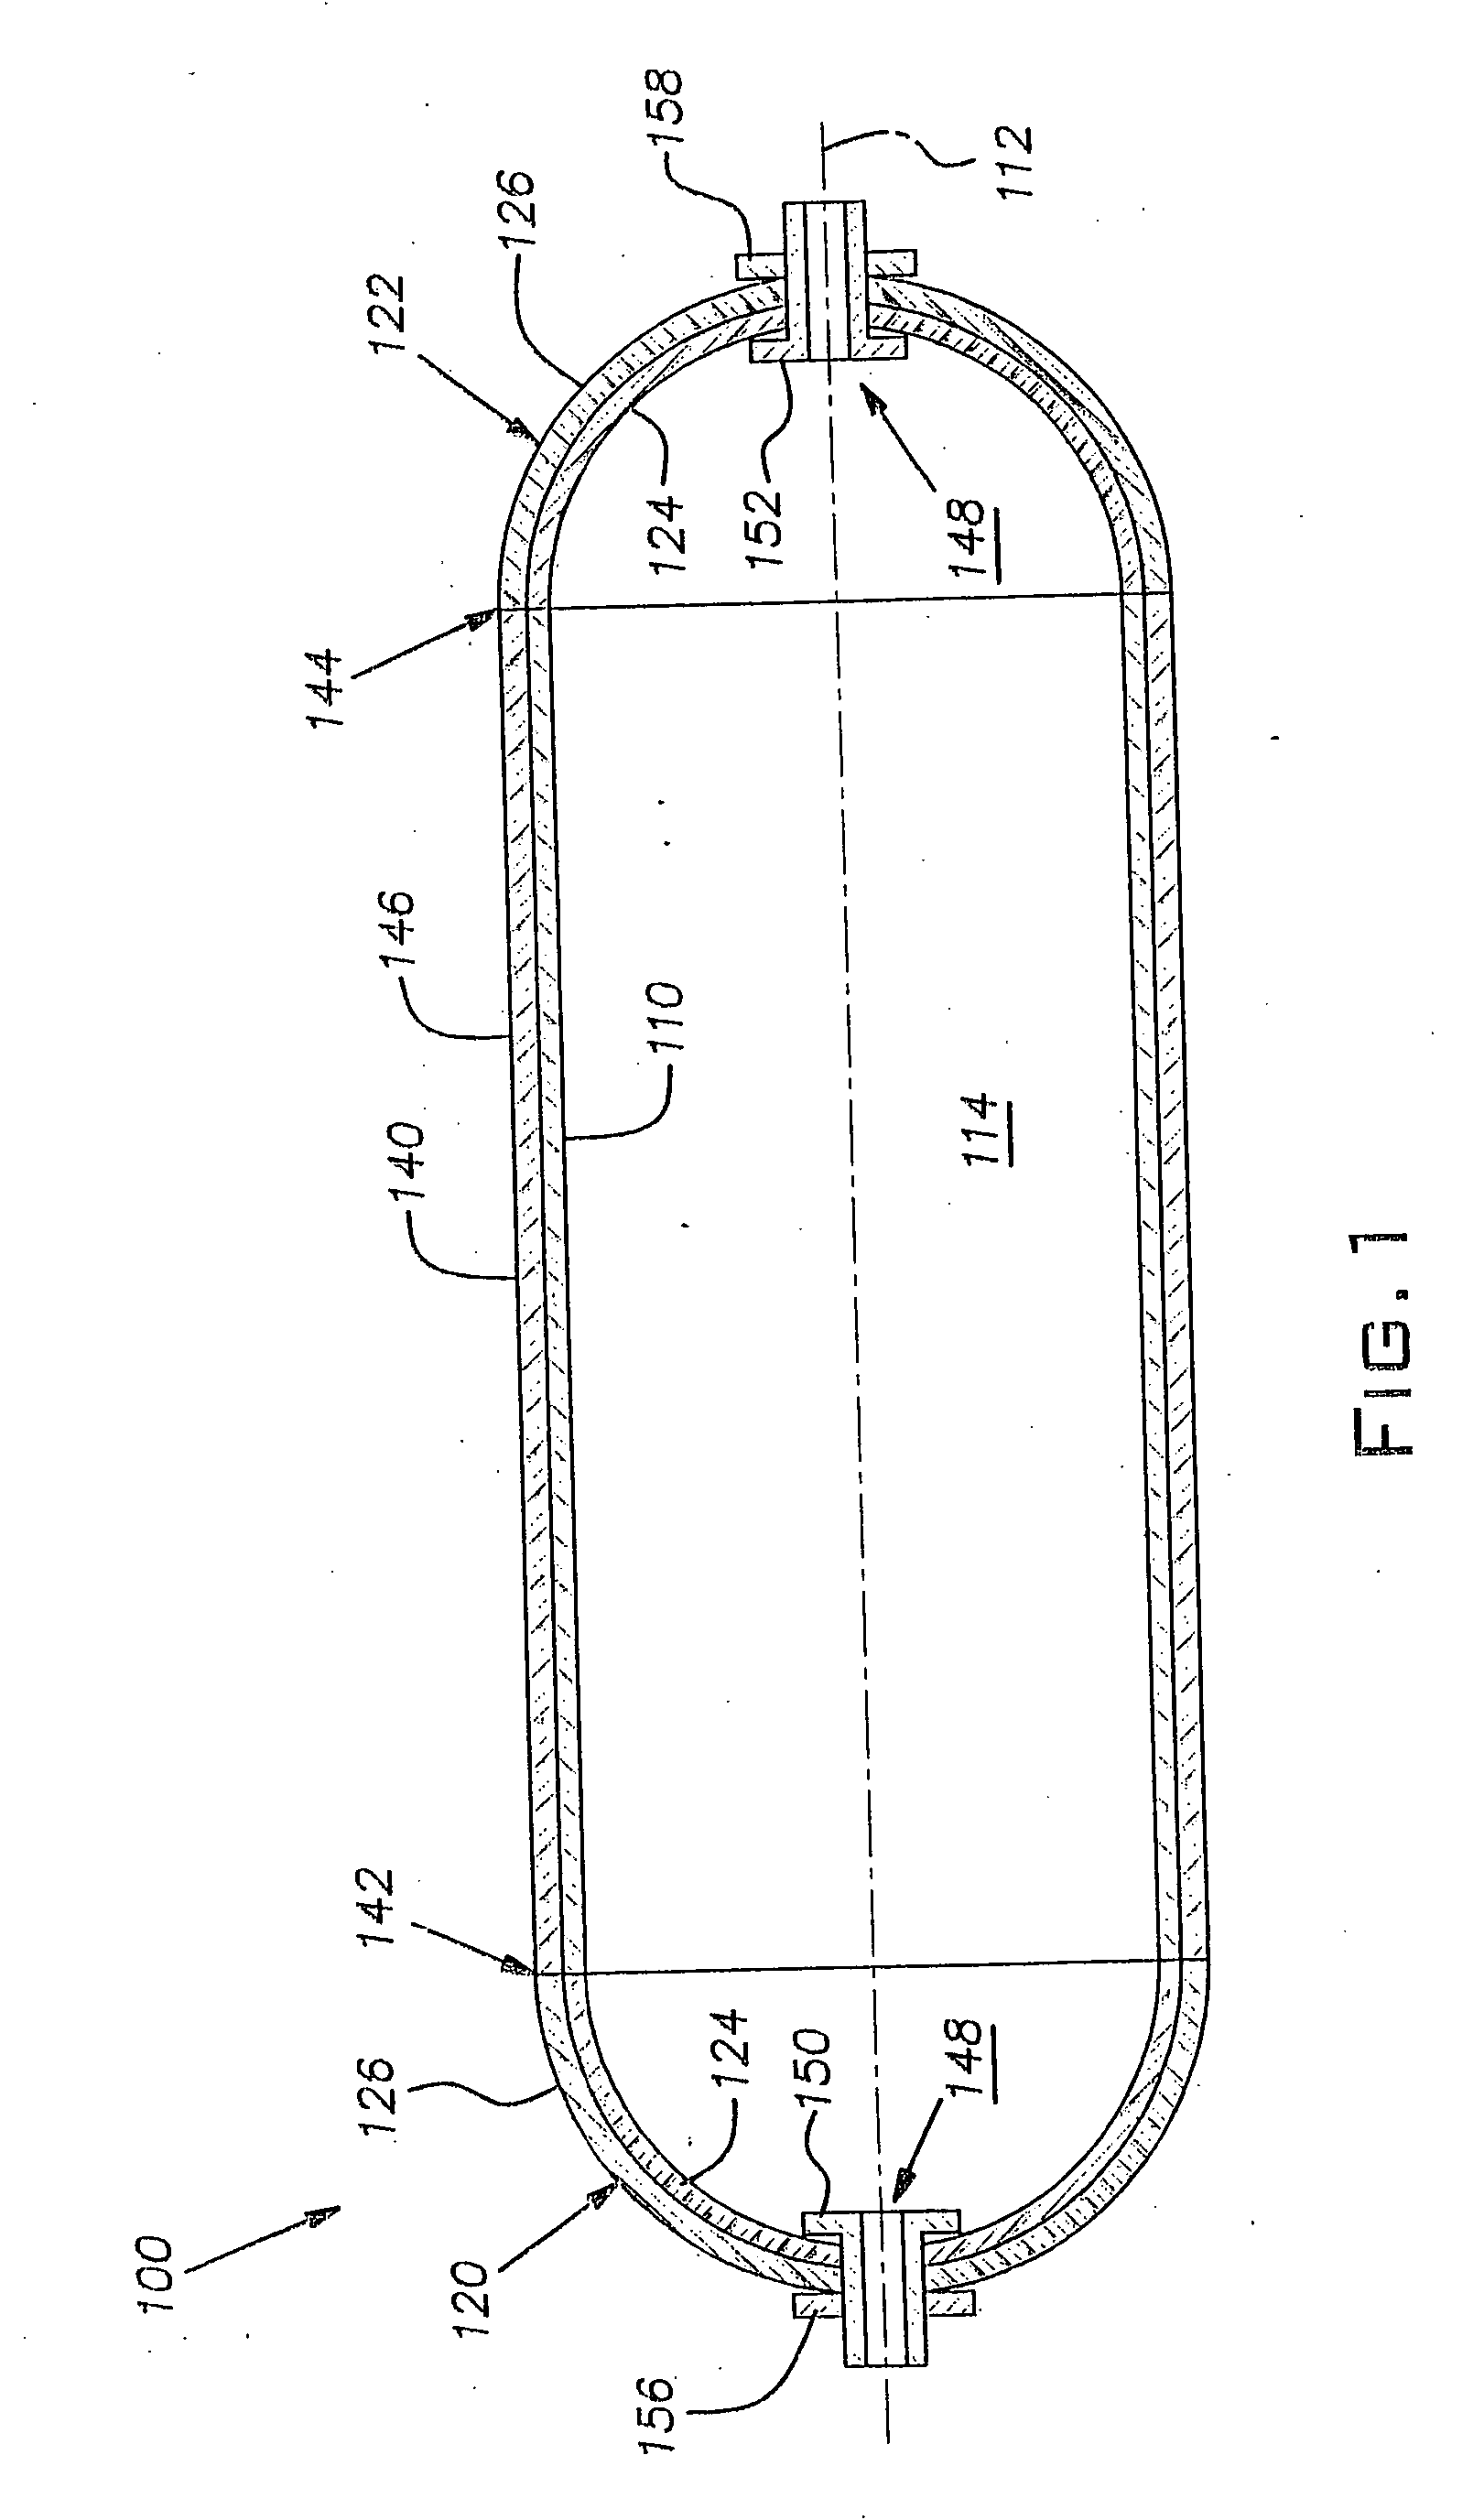 Composite pressure vessel assembly and method